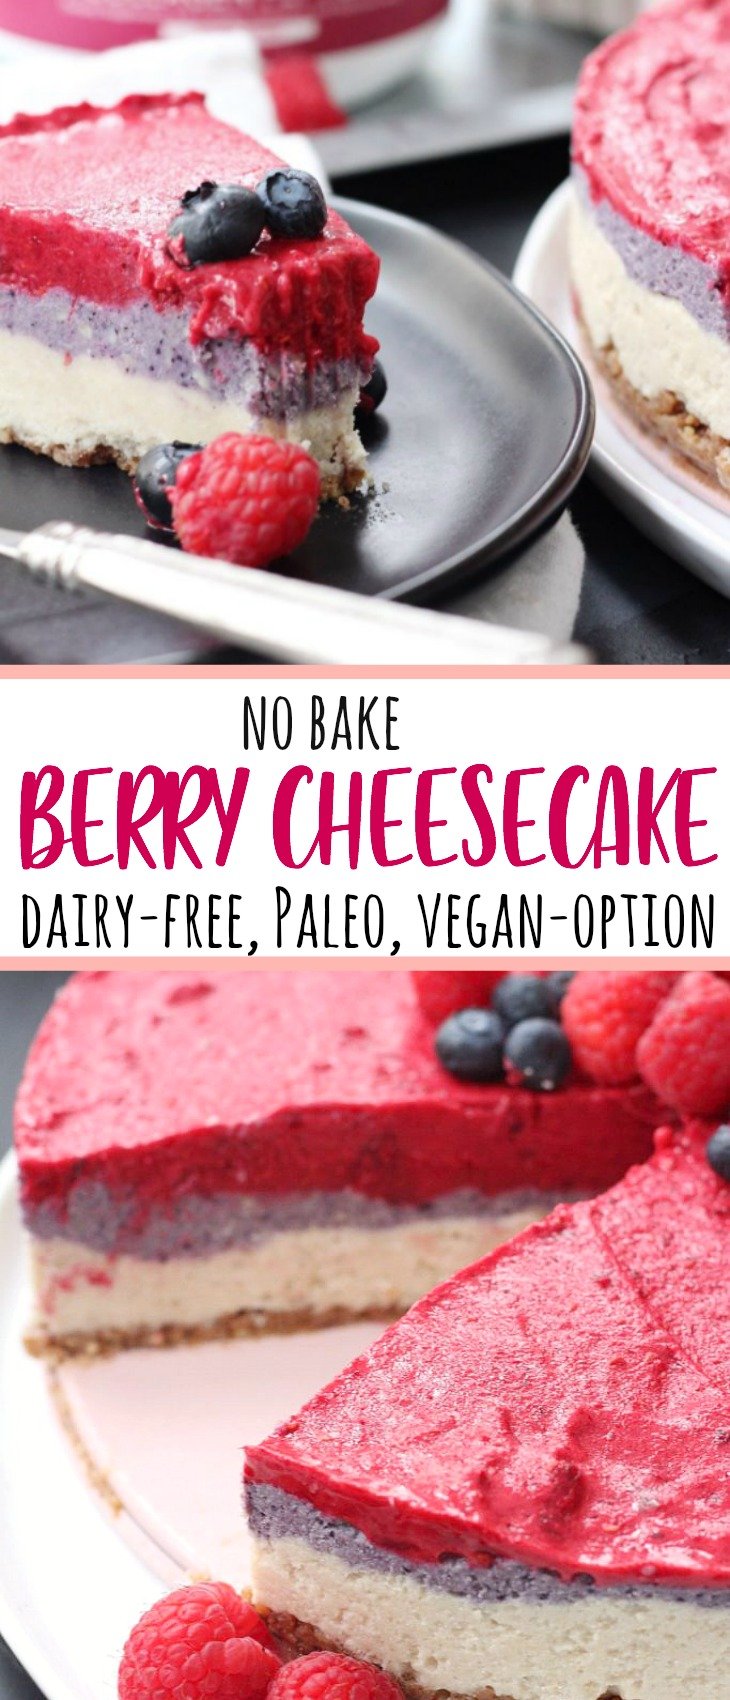 Easy paleo cheesecake is a fun recipe to make for any special occasion or just for dessert! With colorful dairy free cheesecake layers and a simple no bake crust, you'll feel like you're indulging when you're eating totally healthy! #paleocheesecake #dairyfreecheesecake #nobakecheesecake #vegancheesecake